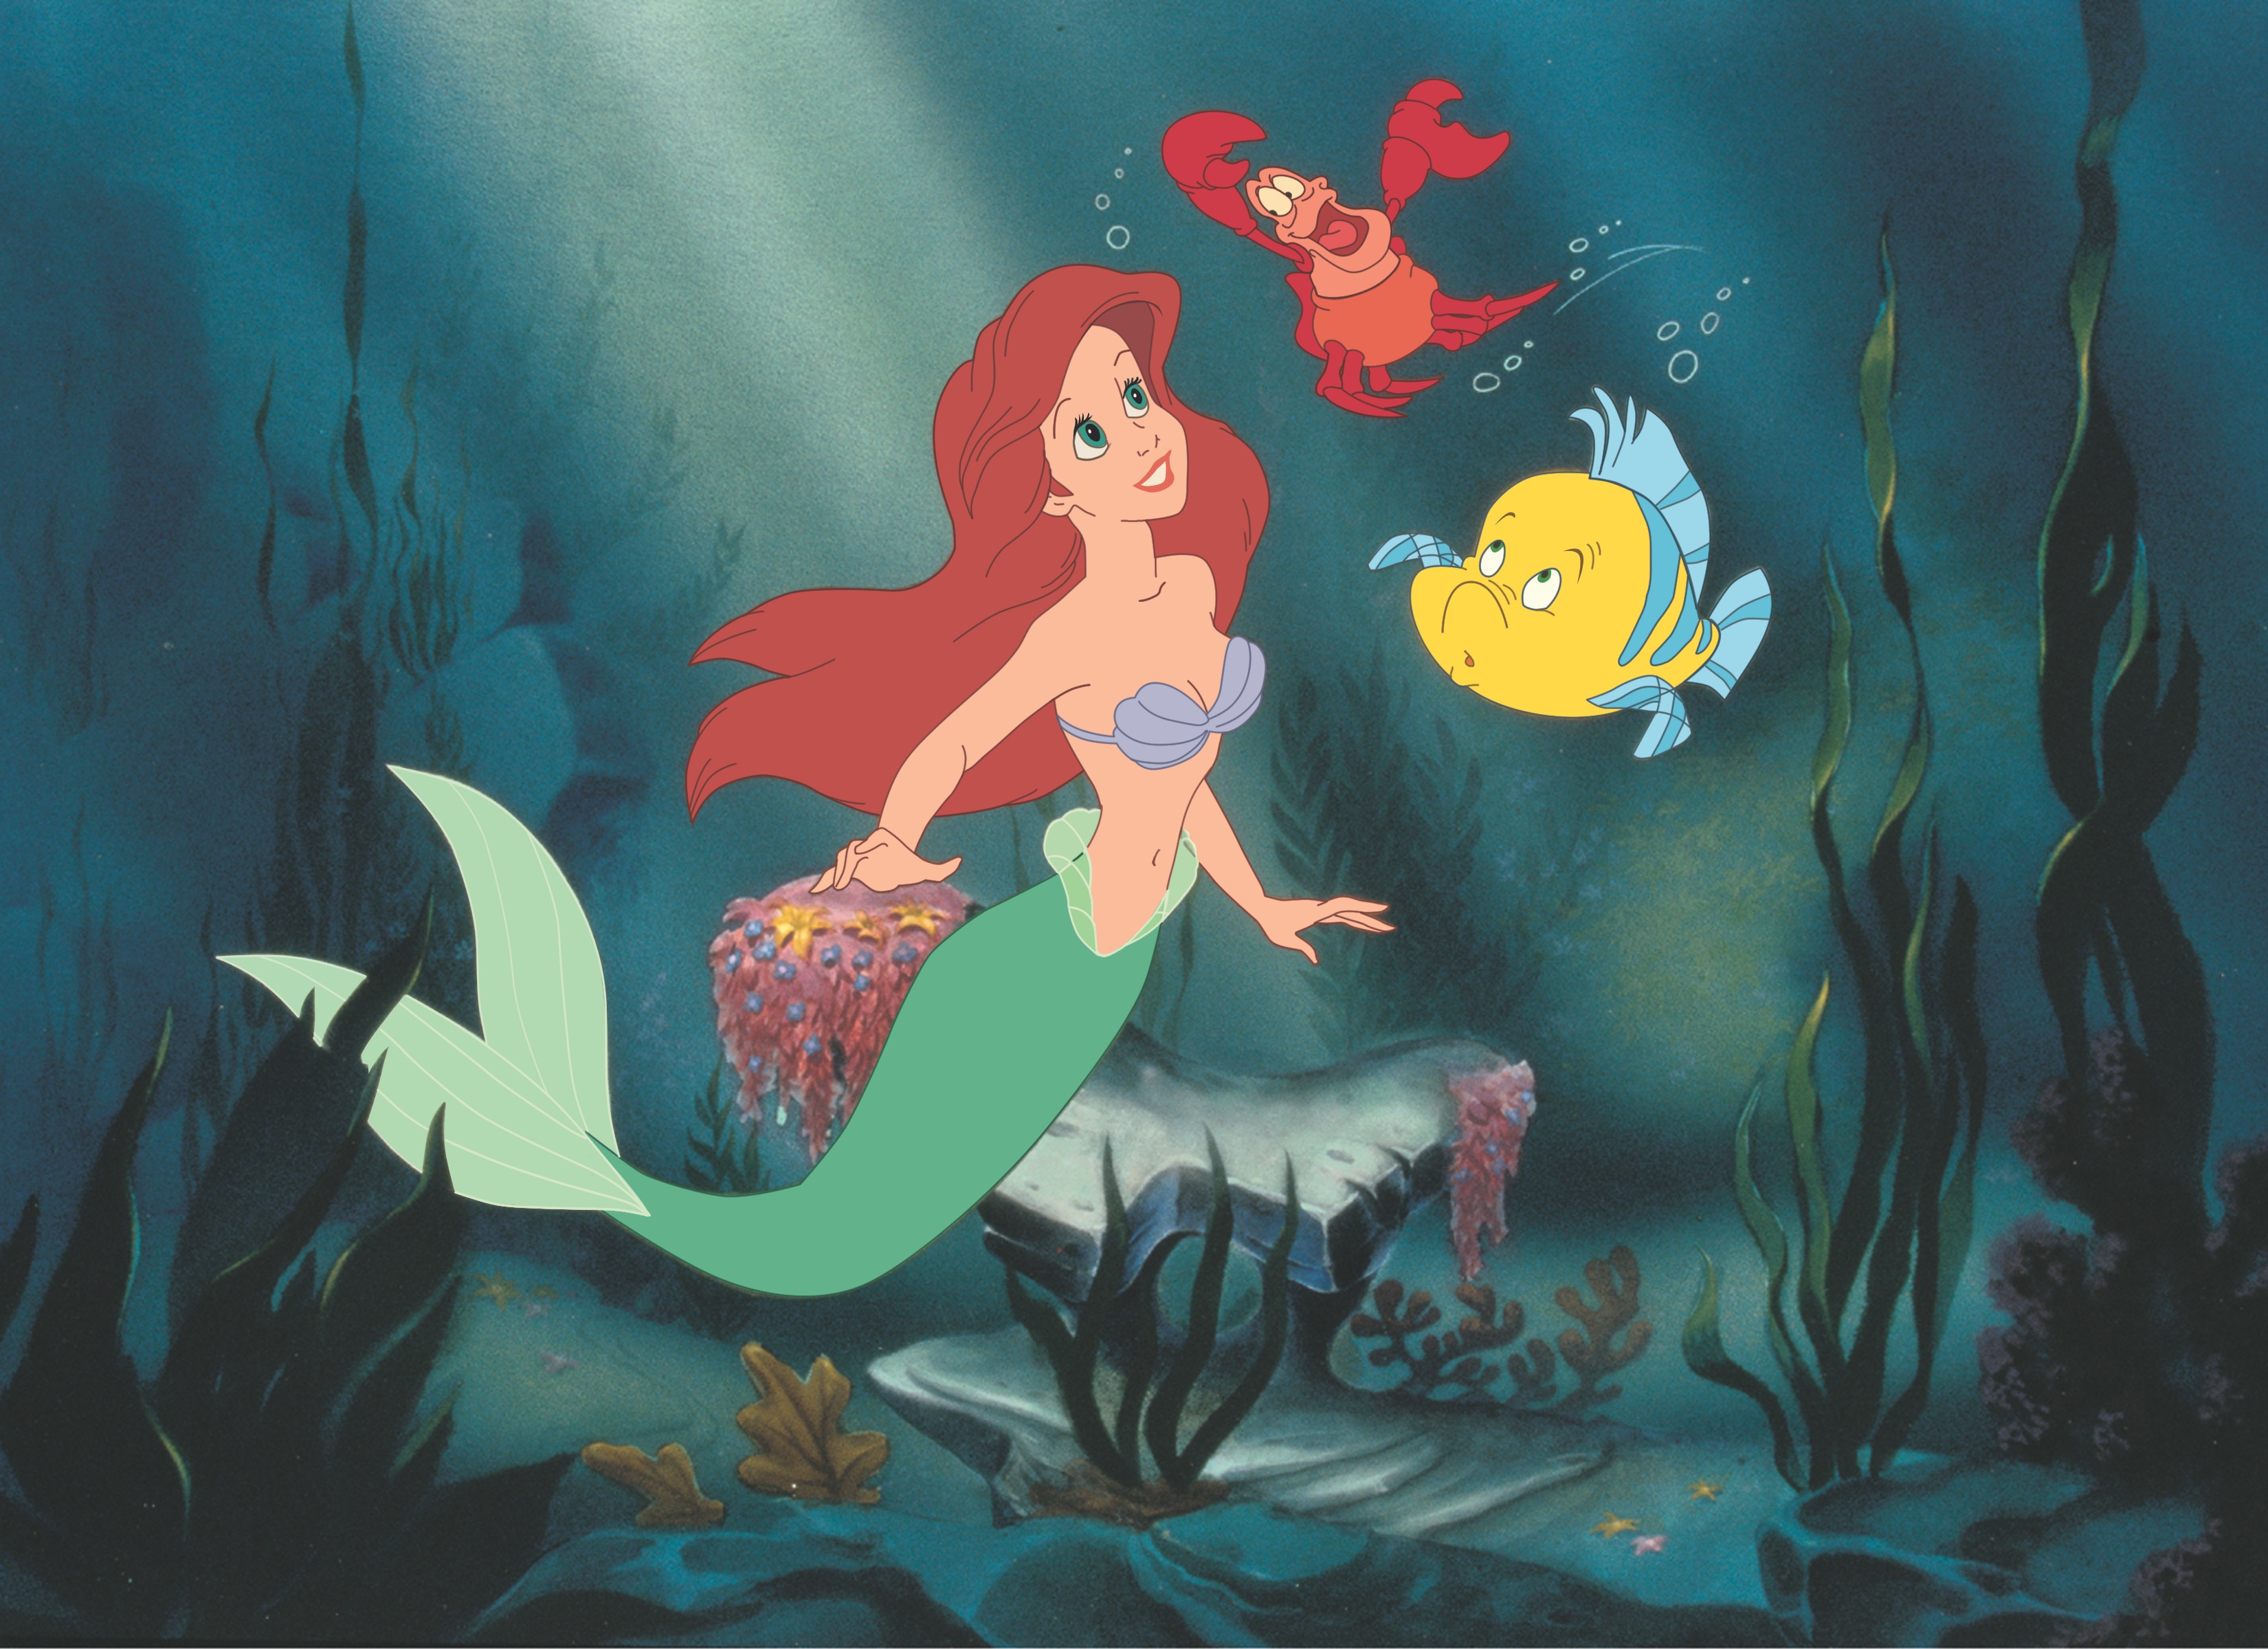 It's been 30 years since Ariel first swam into theaters, but the fandom for Disney’s lovable mermaid princess has continued grow as each new generation experiences the magic of “The Little Mermaid.” This month the classic film will be joining the Walt Disney Signature Collection with both digital (available Feb. 12) and Blu-ray (Feb. 26) editions packed with all-new bonus features. 